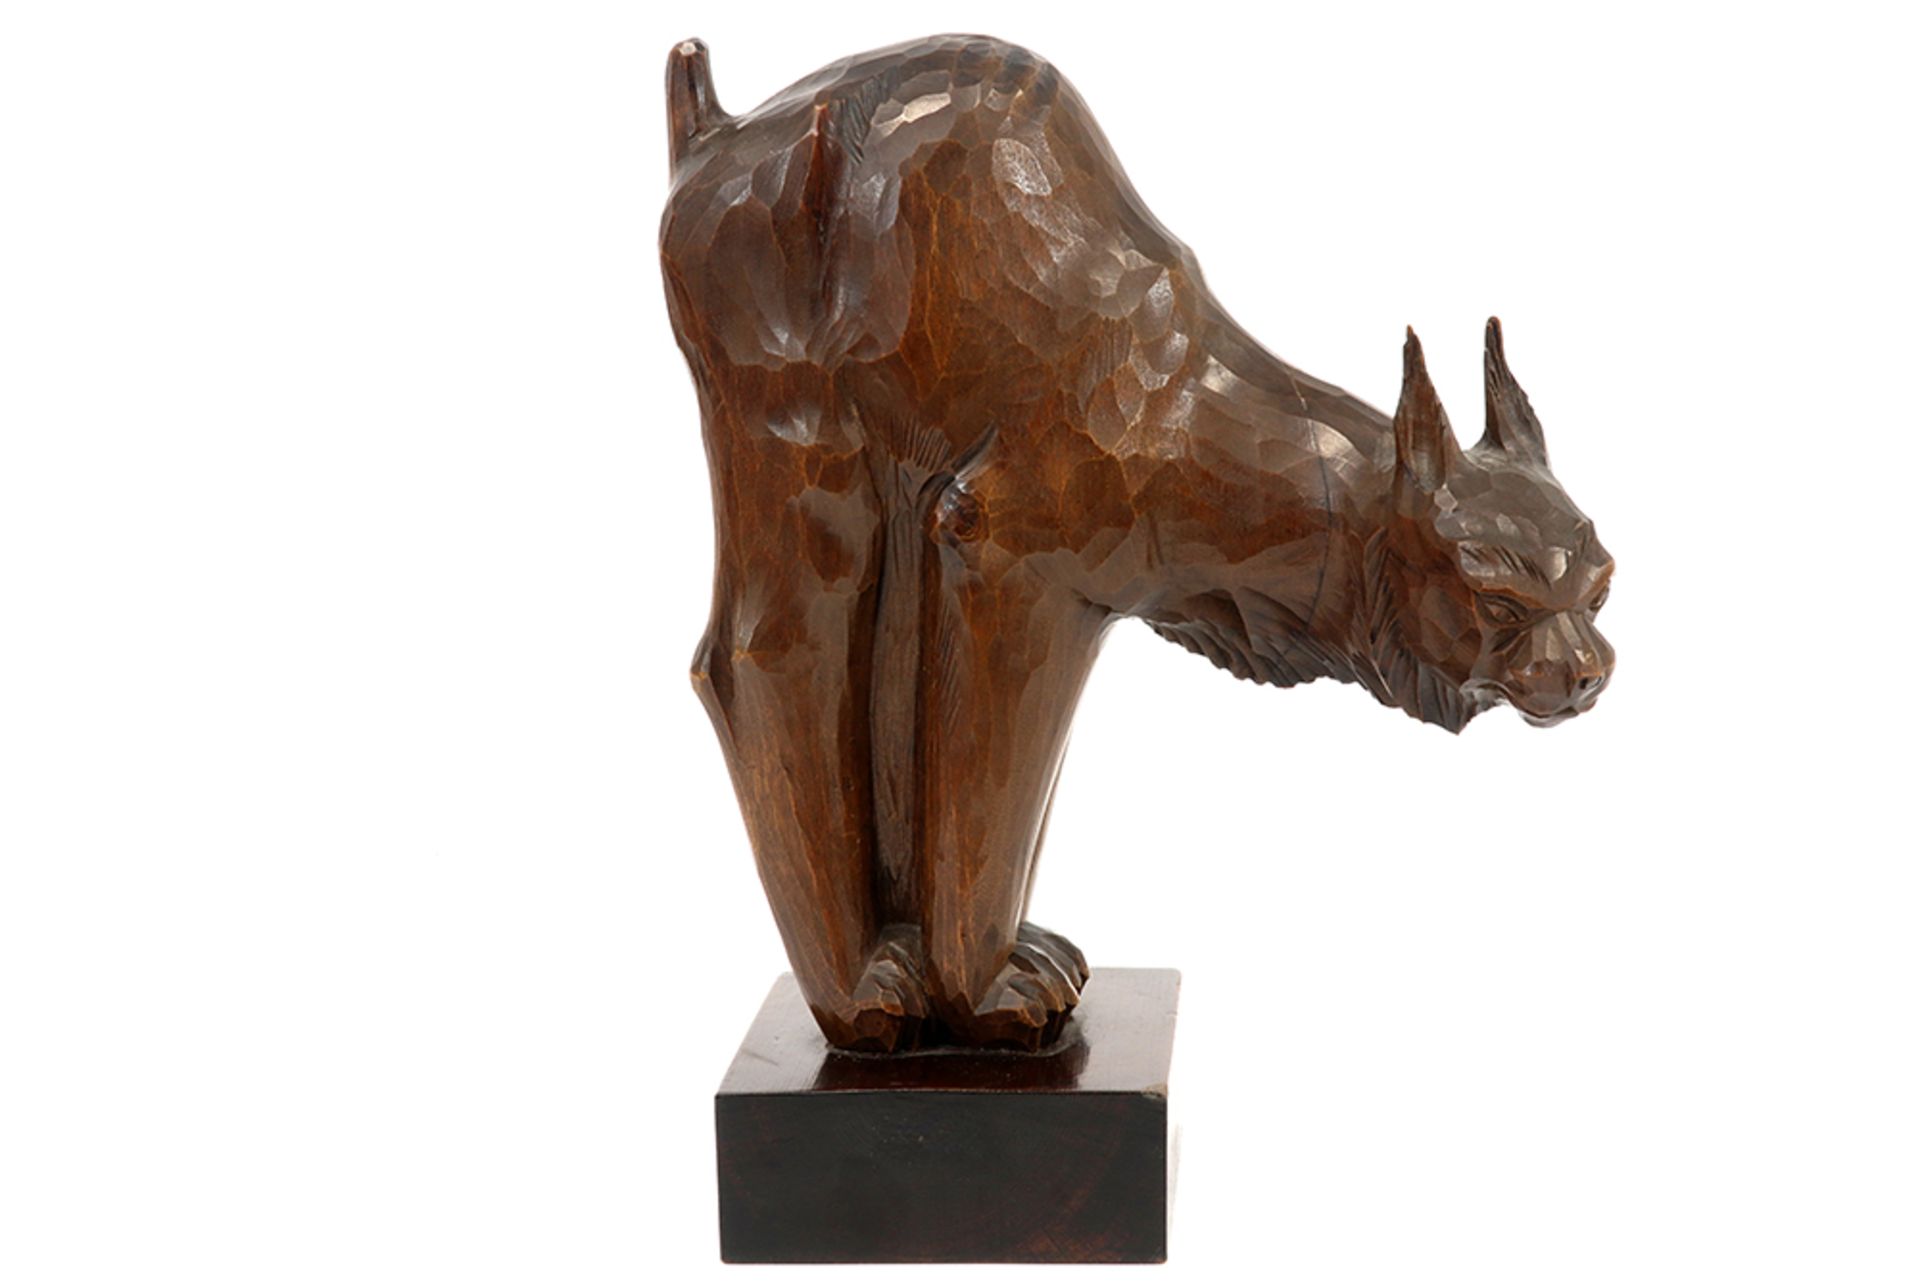 20th Cent. wooden "Lynx" sculpture - with a monogram yet to be identified || Twintigste eeuwse